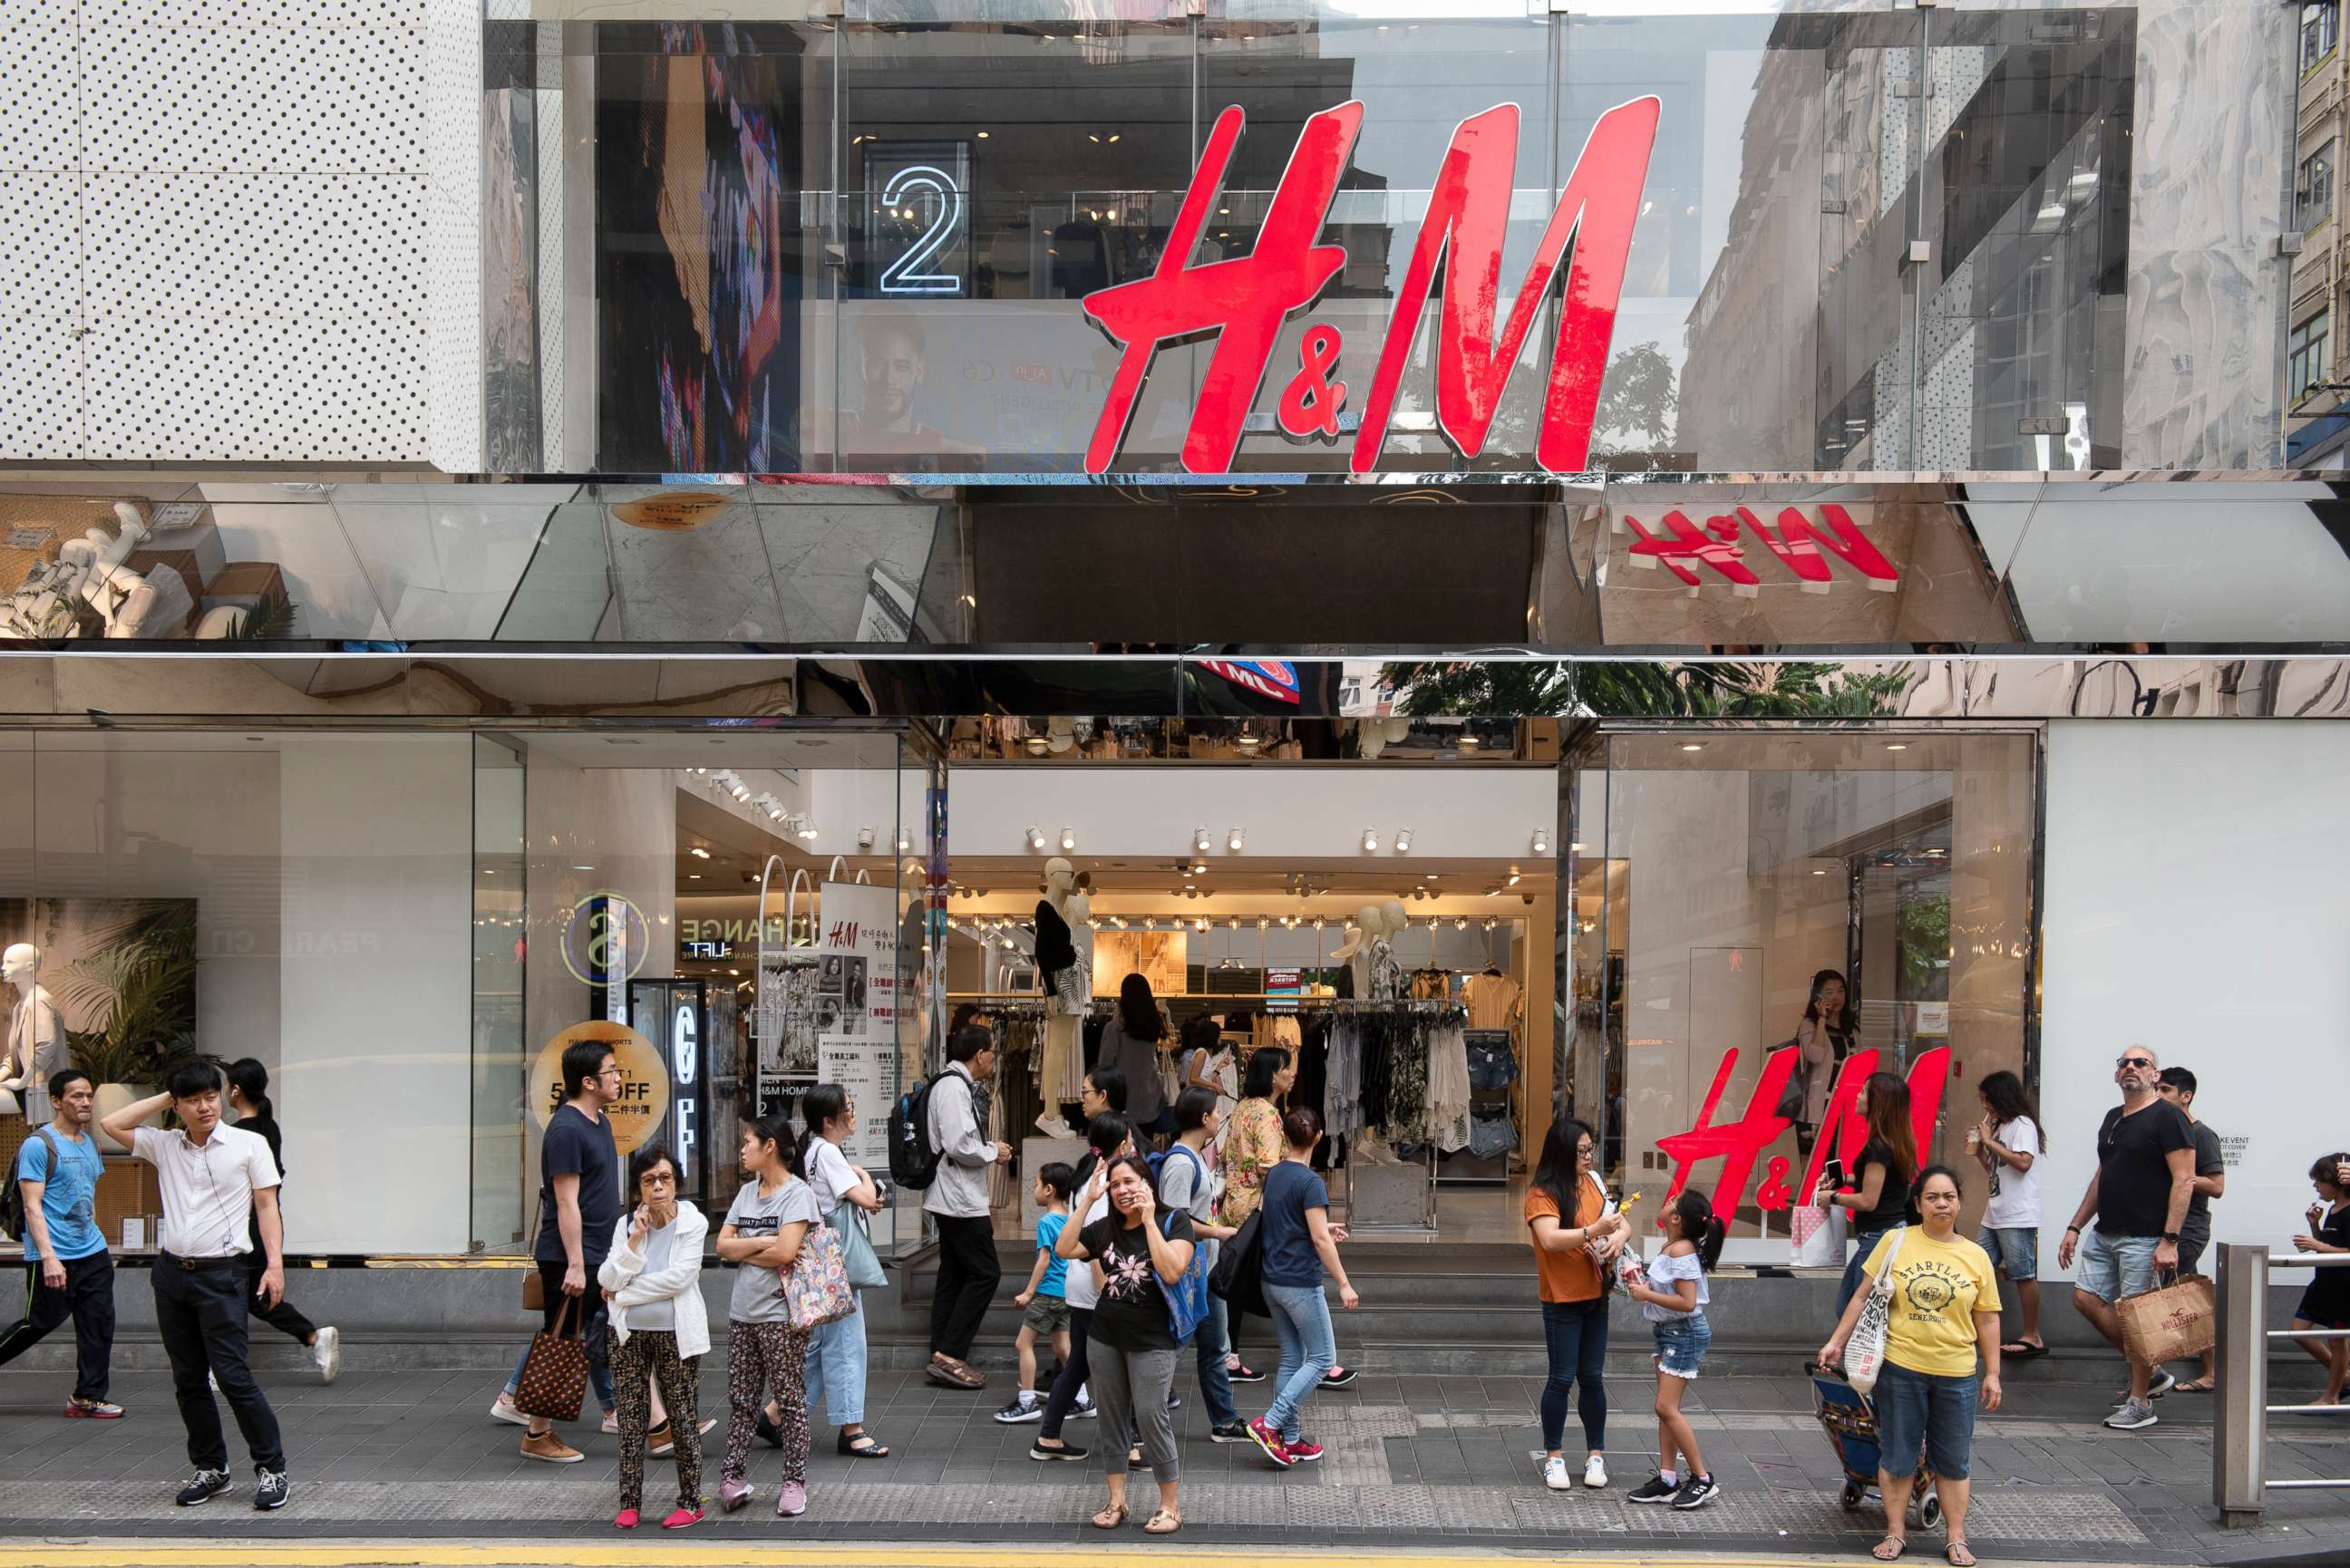 As climate activism surges, fast fashion brands like H&M and Zara may  suffer - ABC News